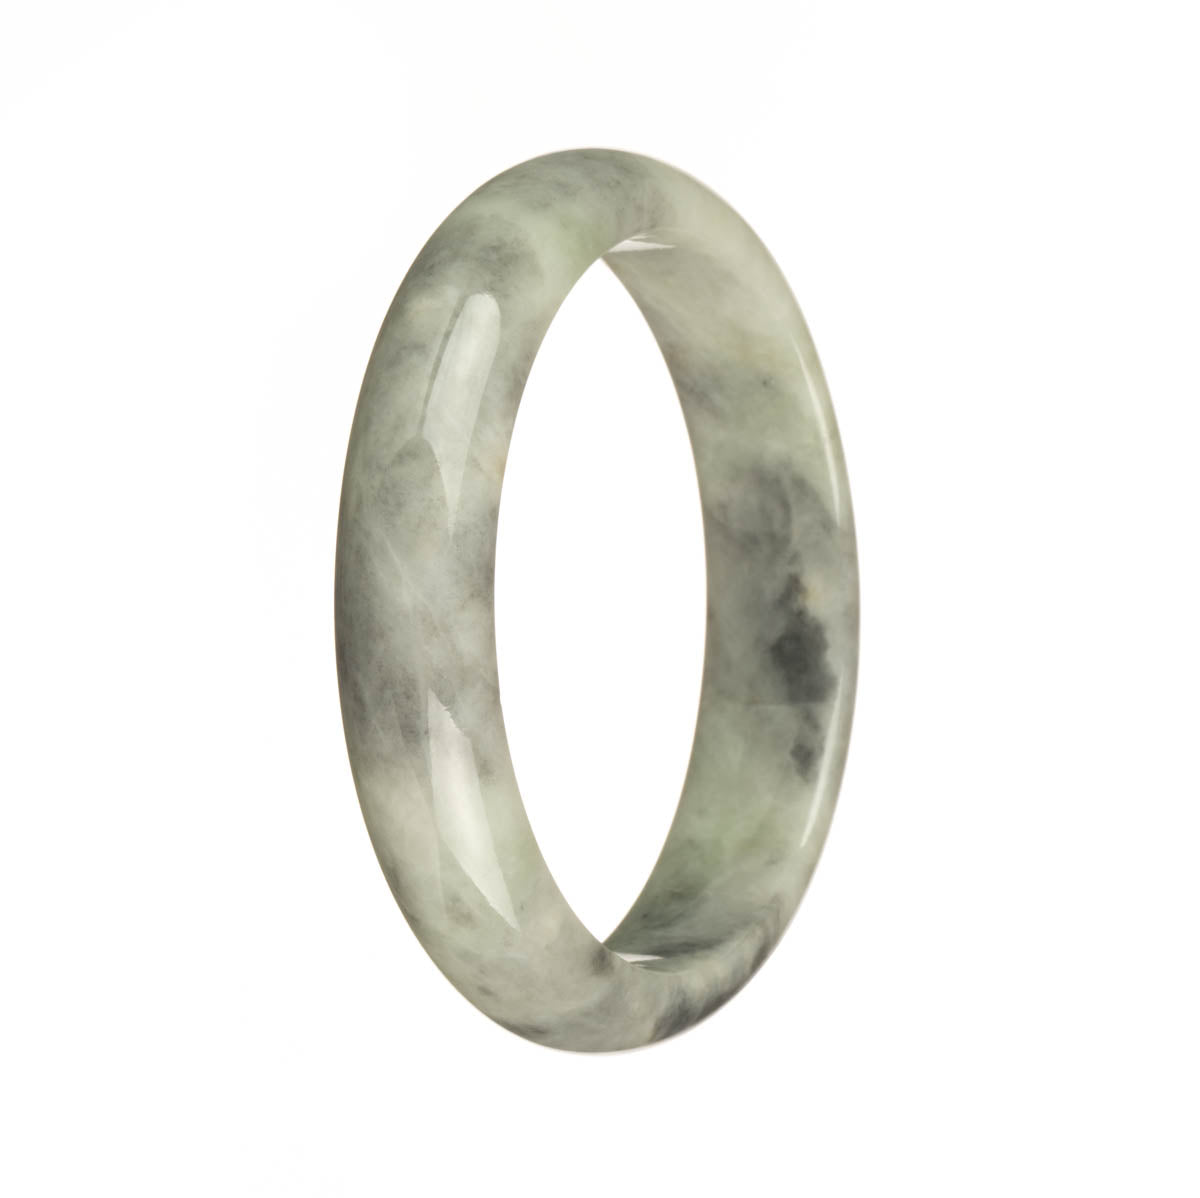 A pale green and grey patterned Burma jade bracelet with a half moon shape, crafted from genuine Grade A jade.